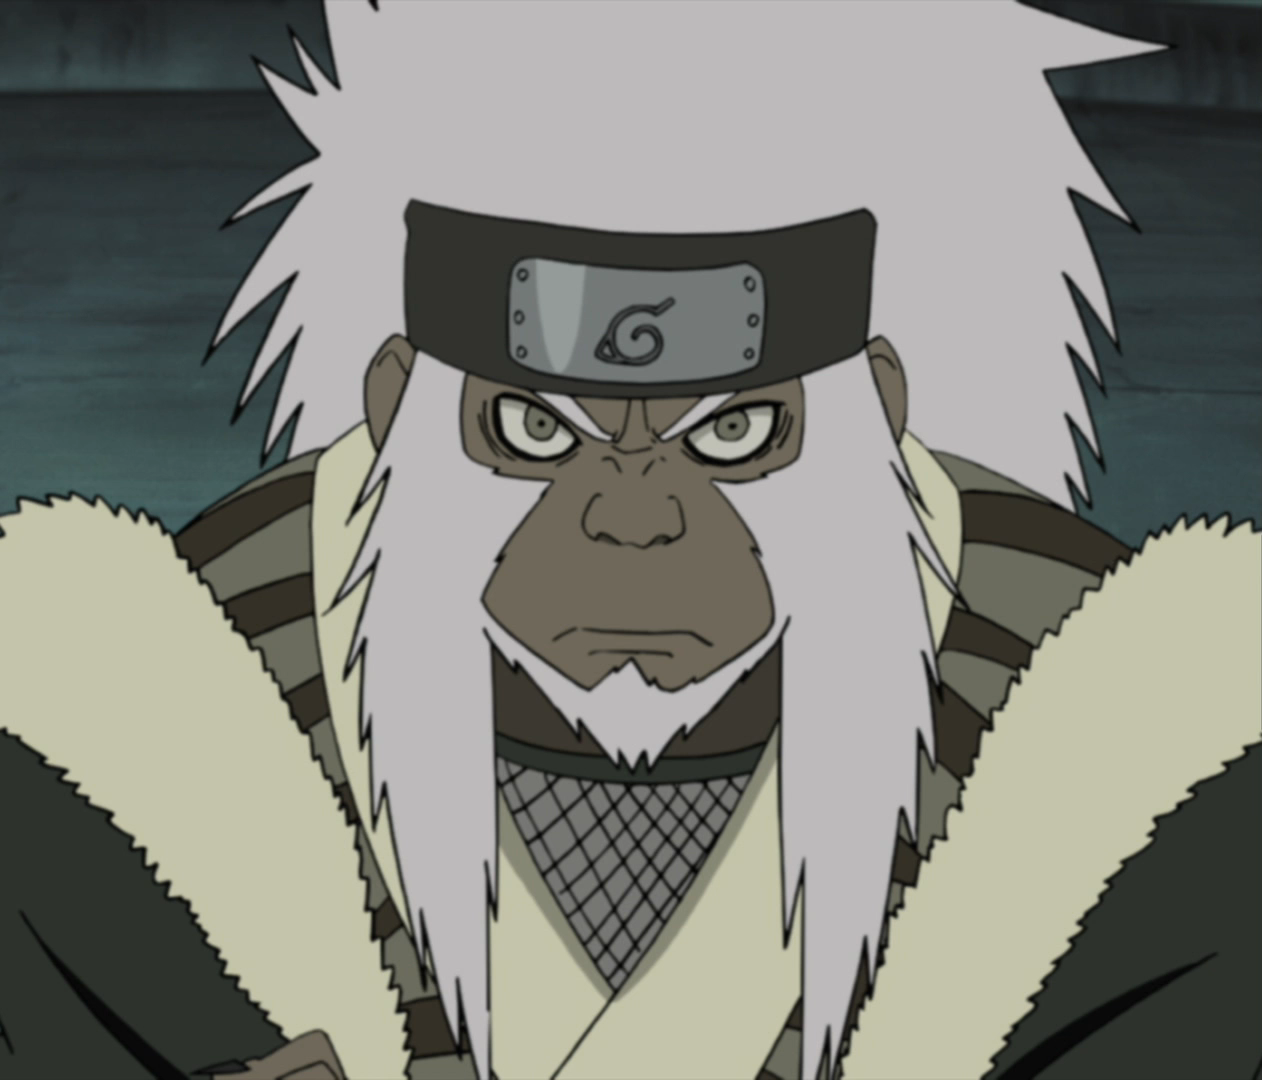 Why didn't Danzo become Hokage when Hiruzen died? How good of a Hokage  would he have been if he took over? : r/Naruto